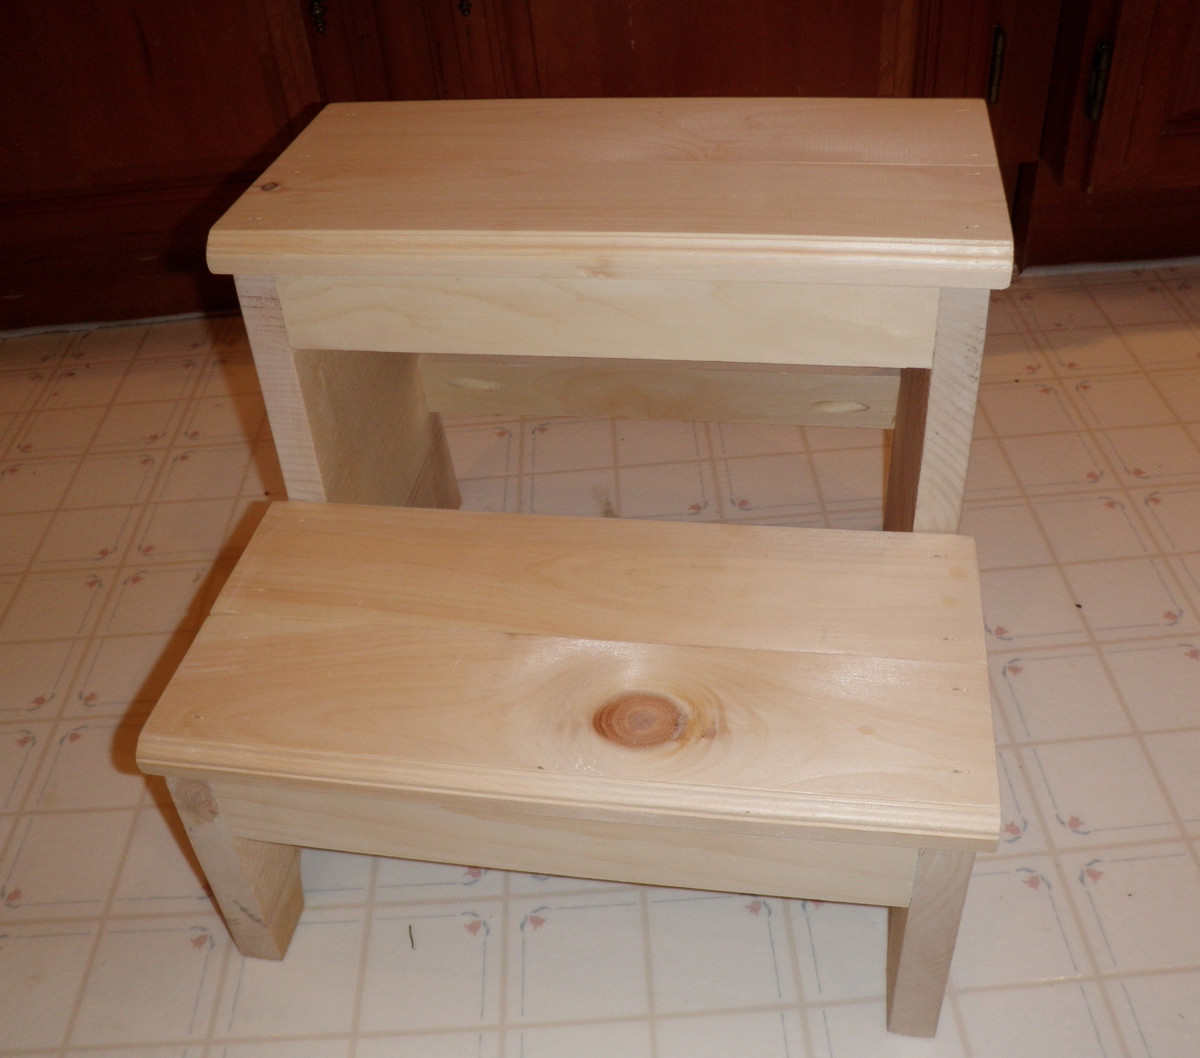 Woodworking how to make a step stool PDF Free Download